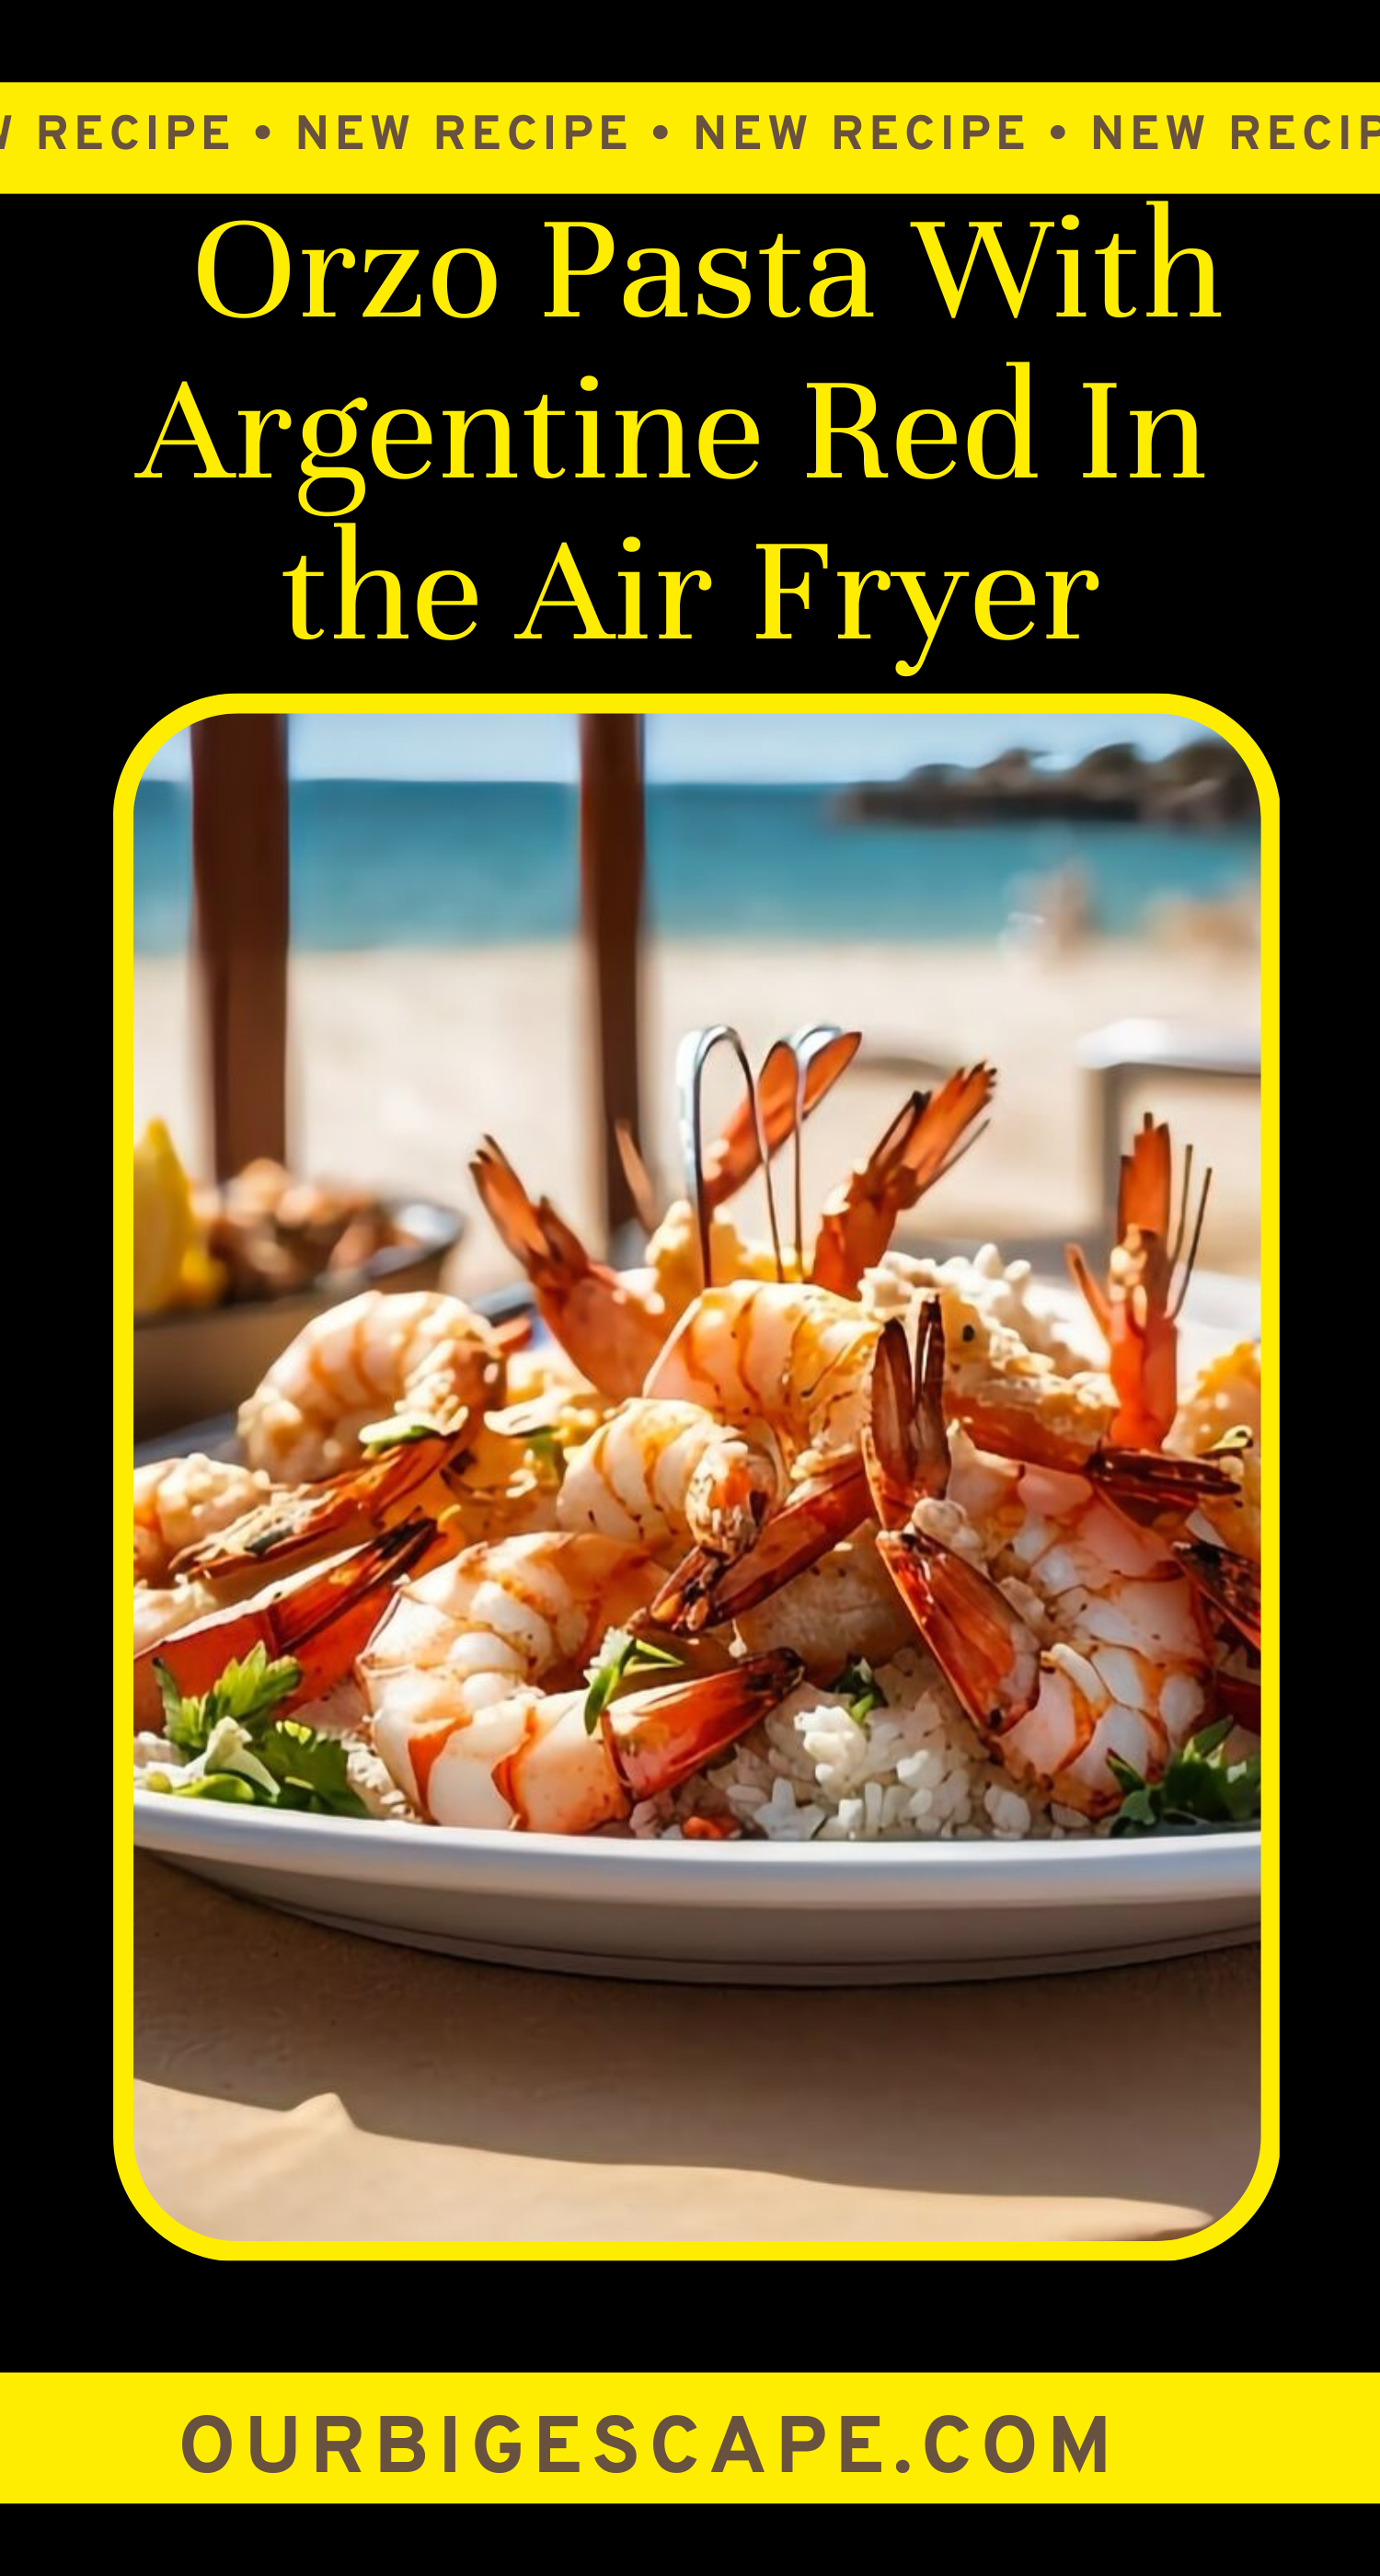 Argentine Red Shrimp In The Air Fryer